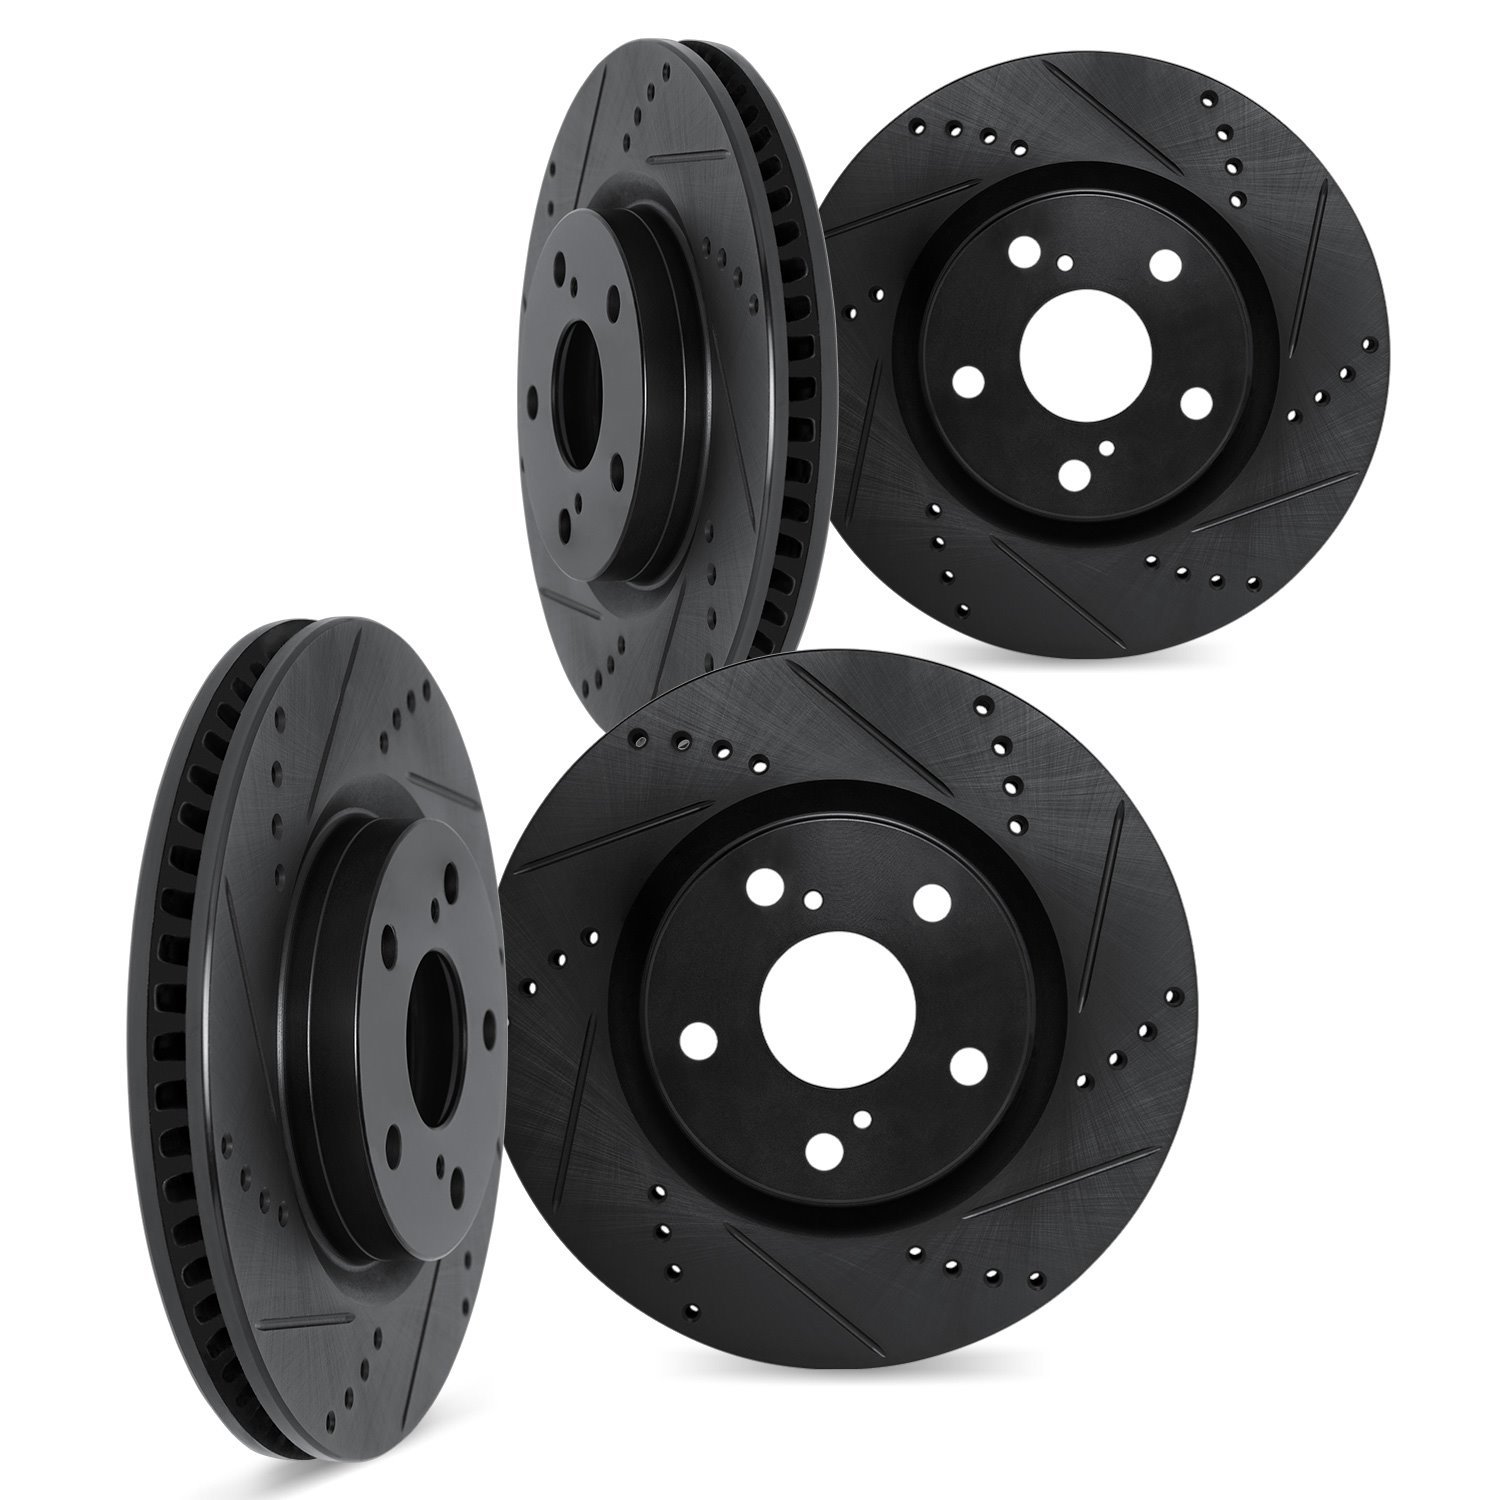 8004-31021 Drilled/Slotted Brake Rotors [Black], 1996-2005 BMW, Position: Front and Rear